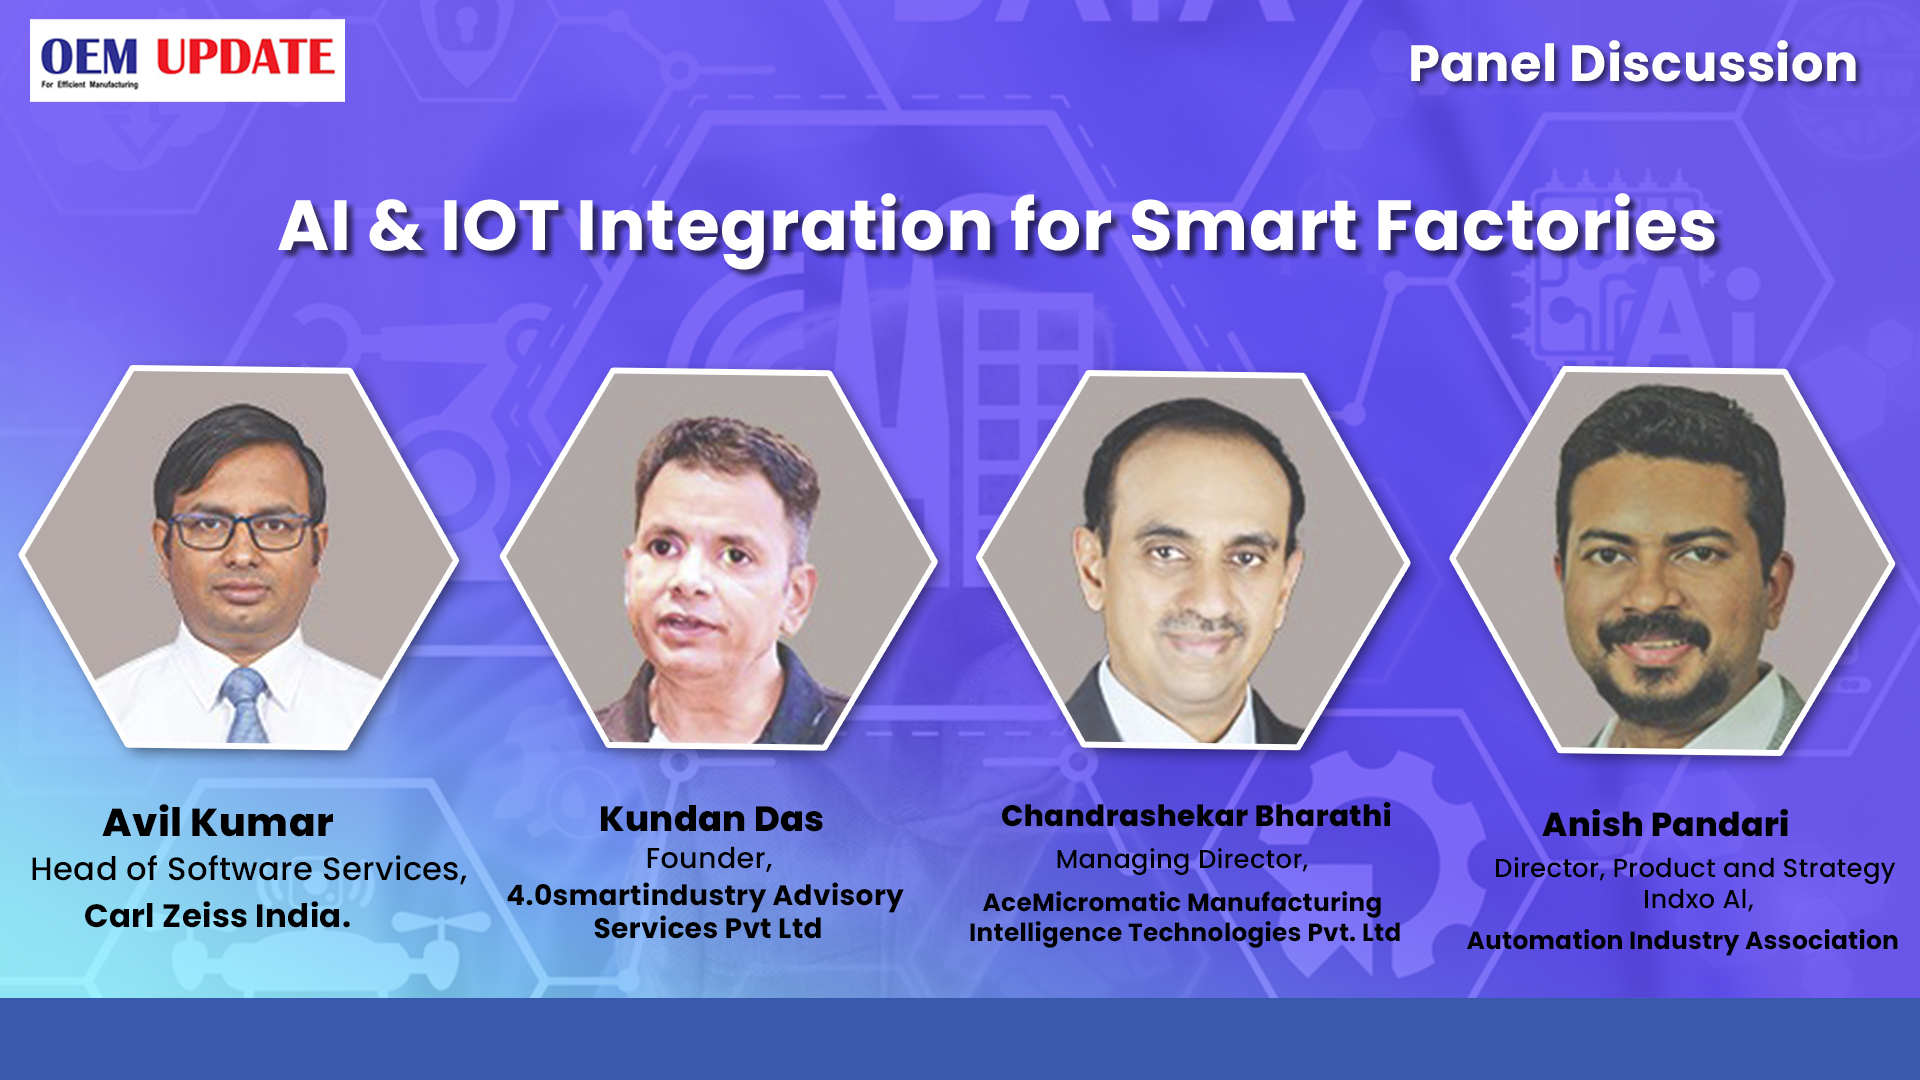 AI and IoT Integration for Smart Factories | Panel Discussion | OEM Update